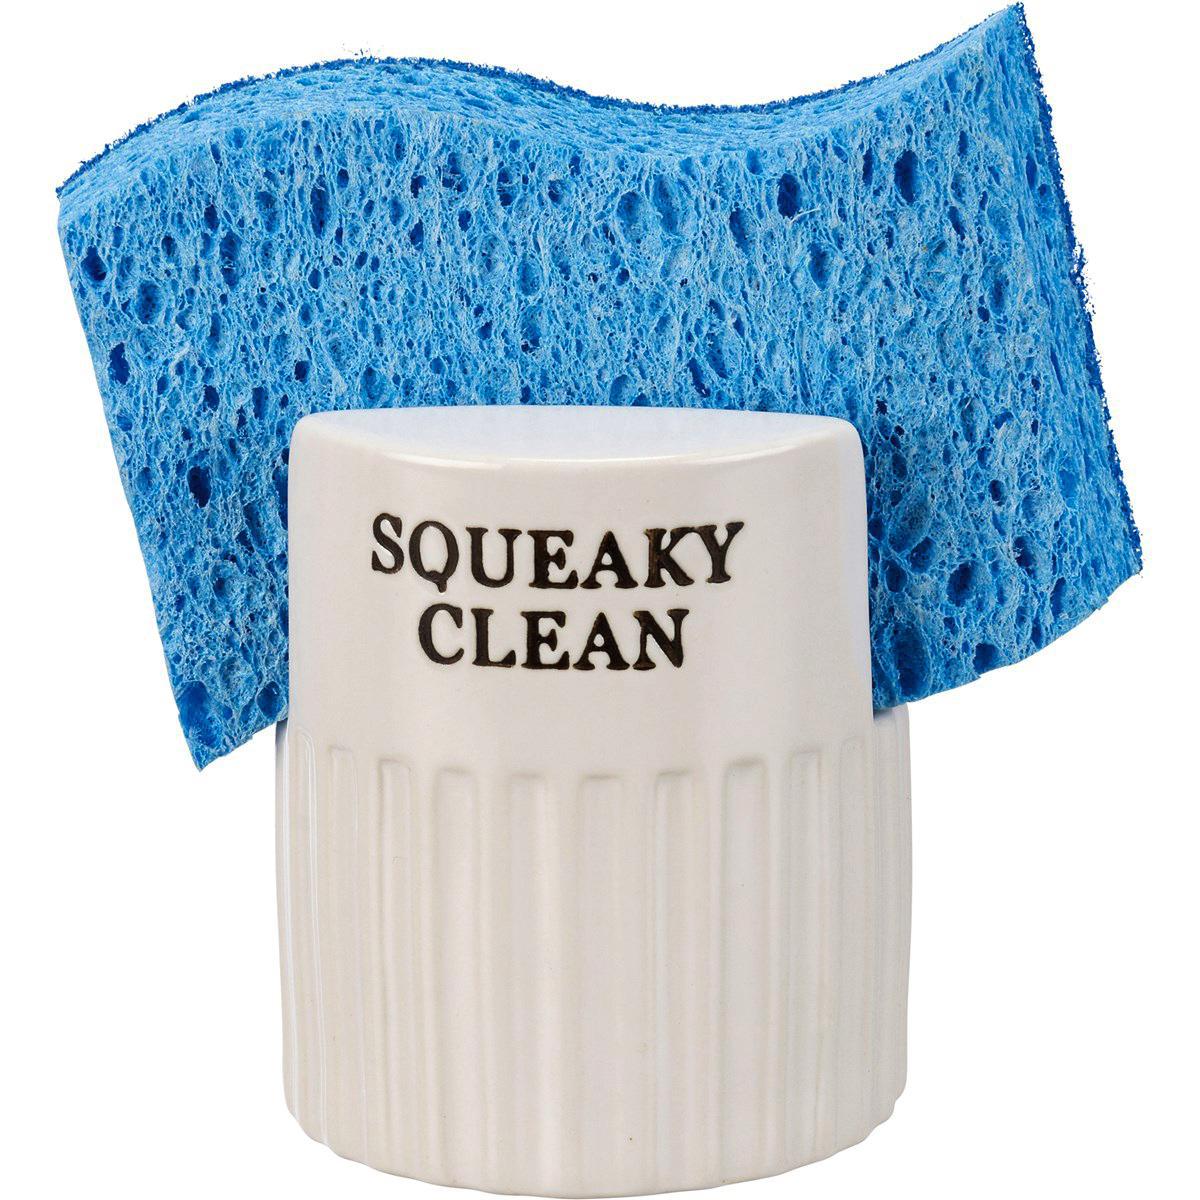 Squeaky Clean Sponge Holder: Farmhouse Chic